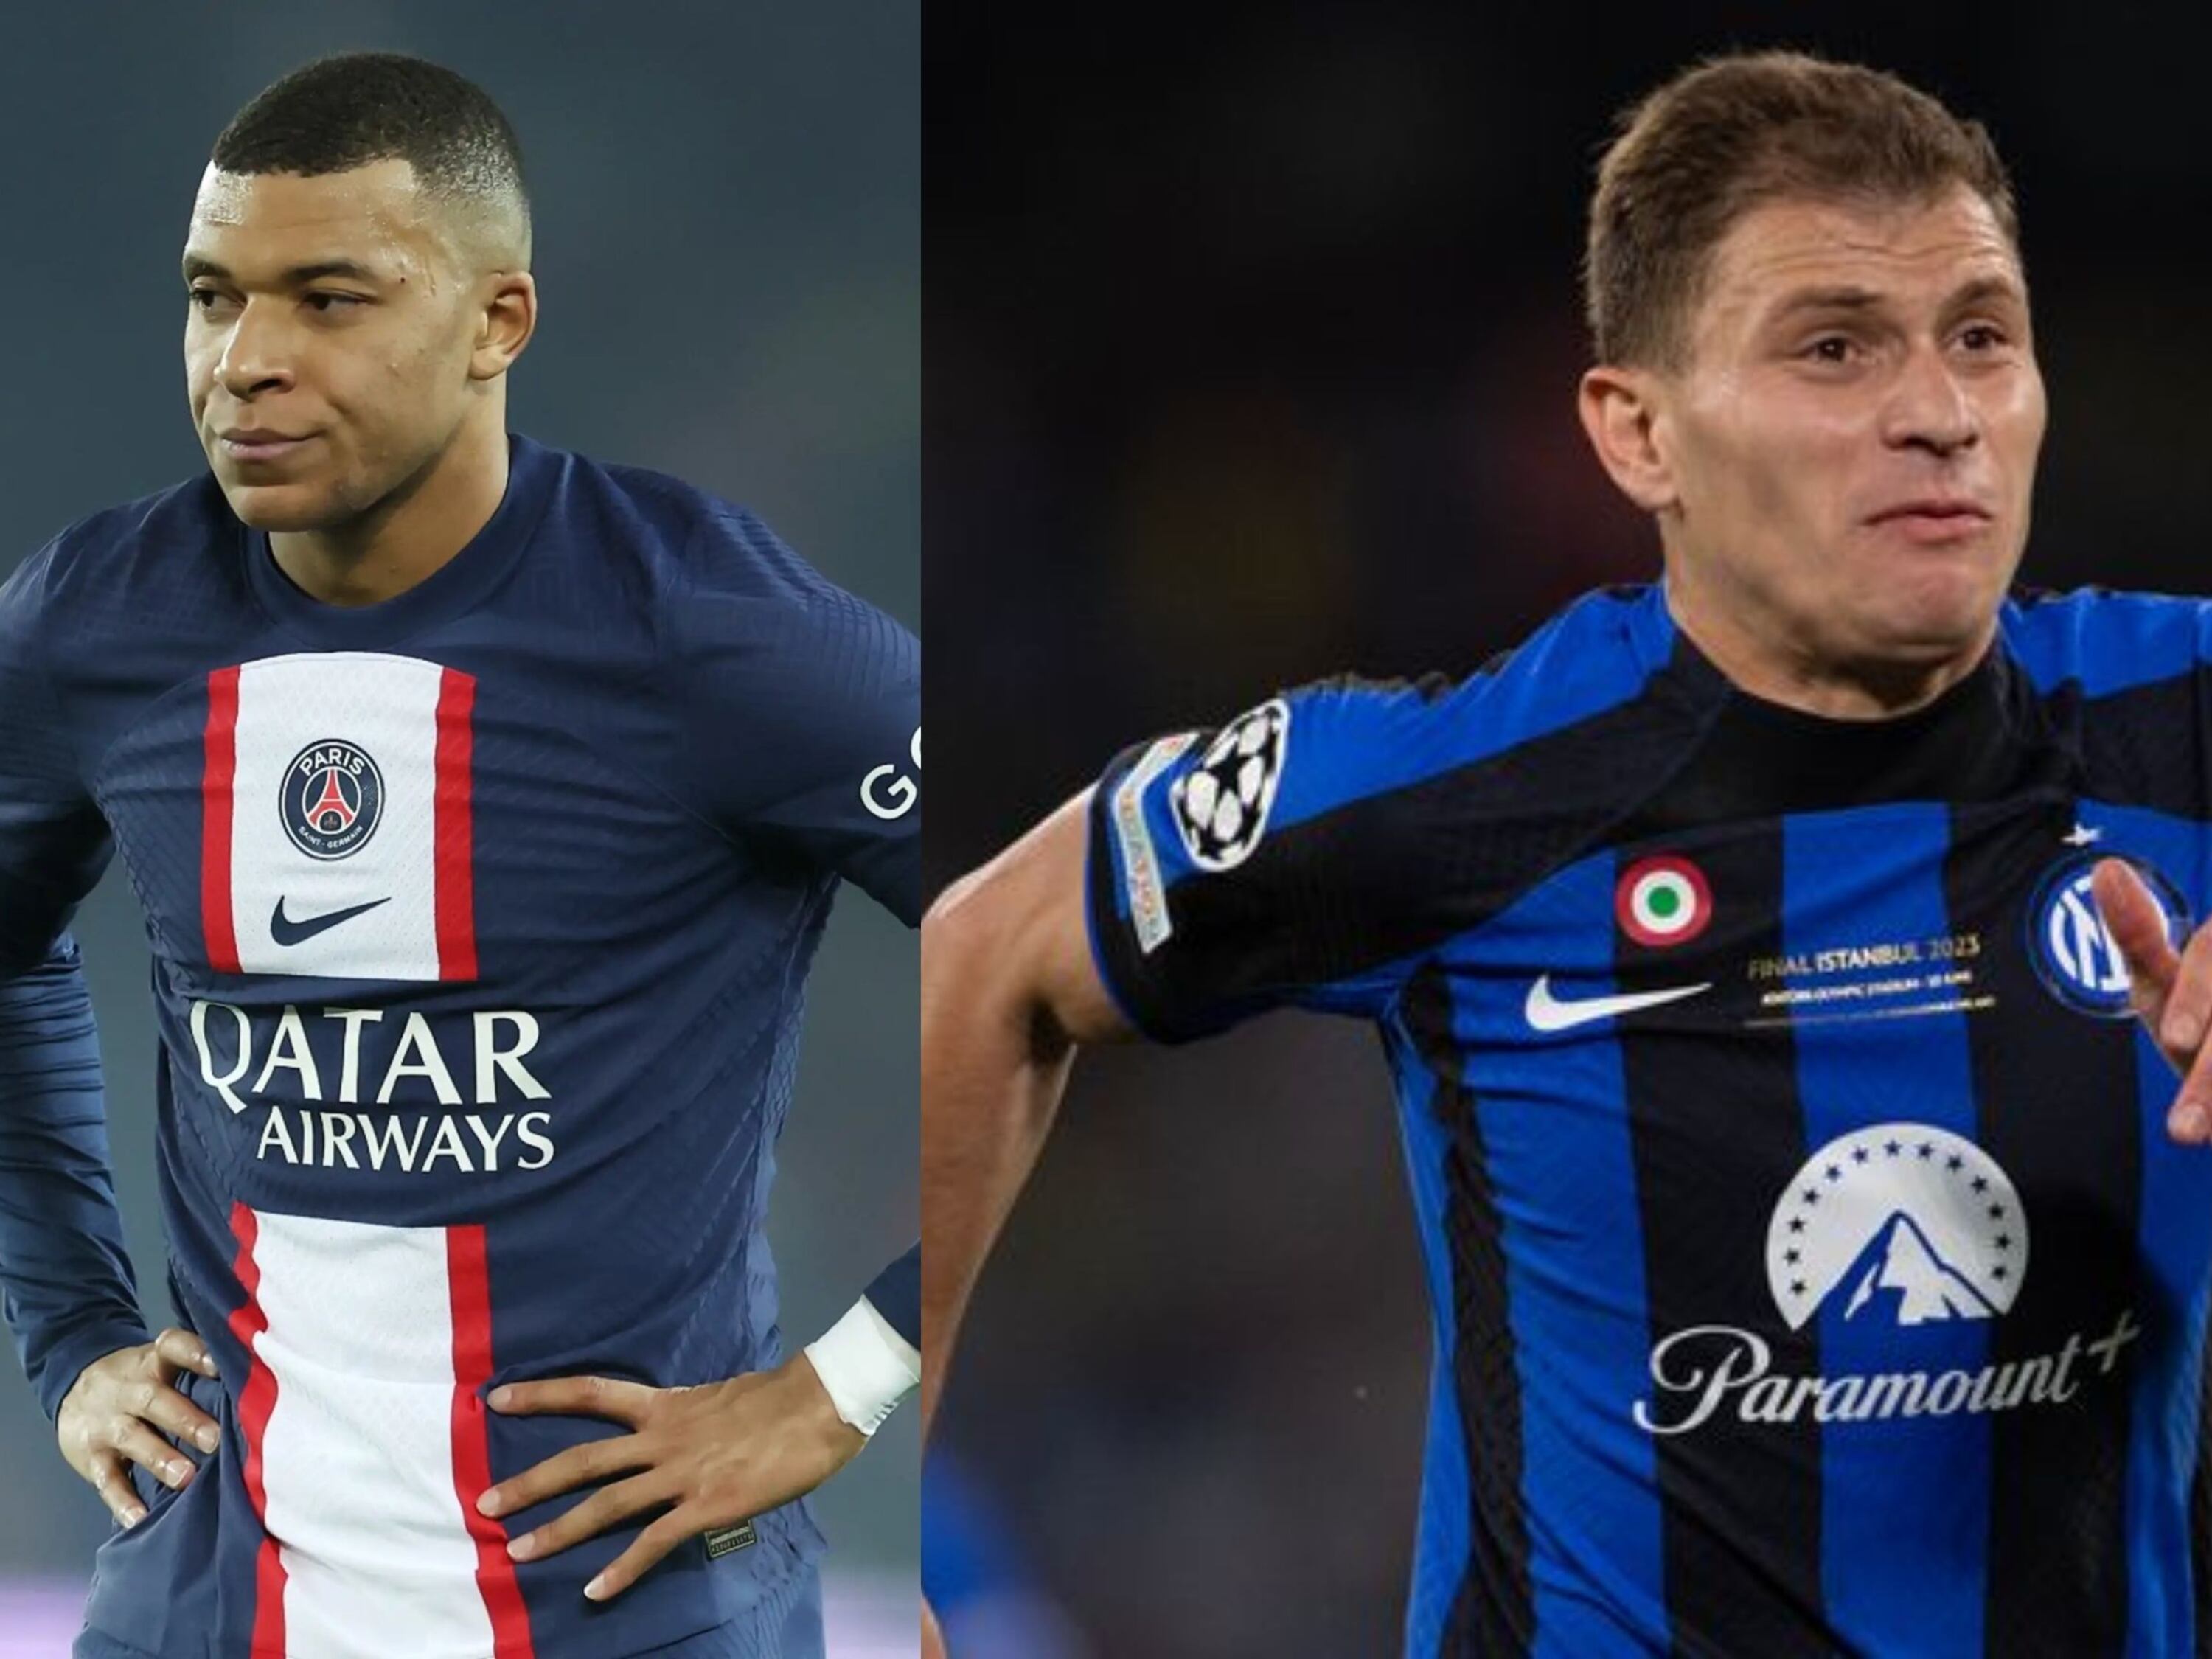 While Kylian Mbappé costs 185 million, the money Liverpool would pay for Nicolo Barella